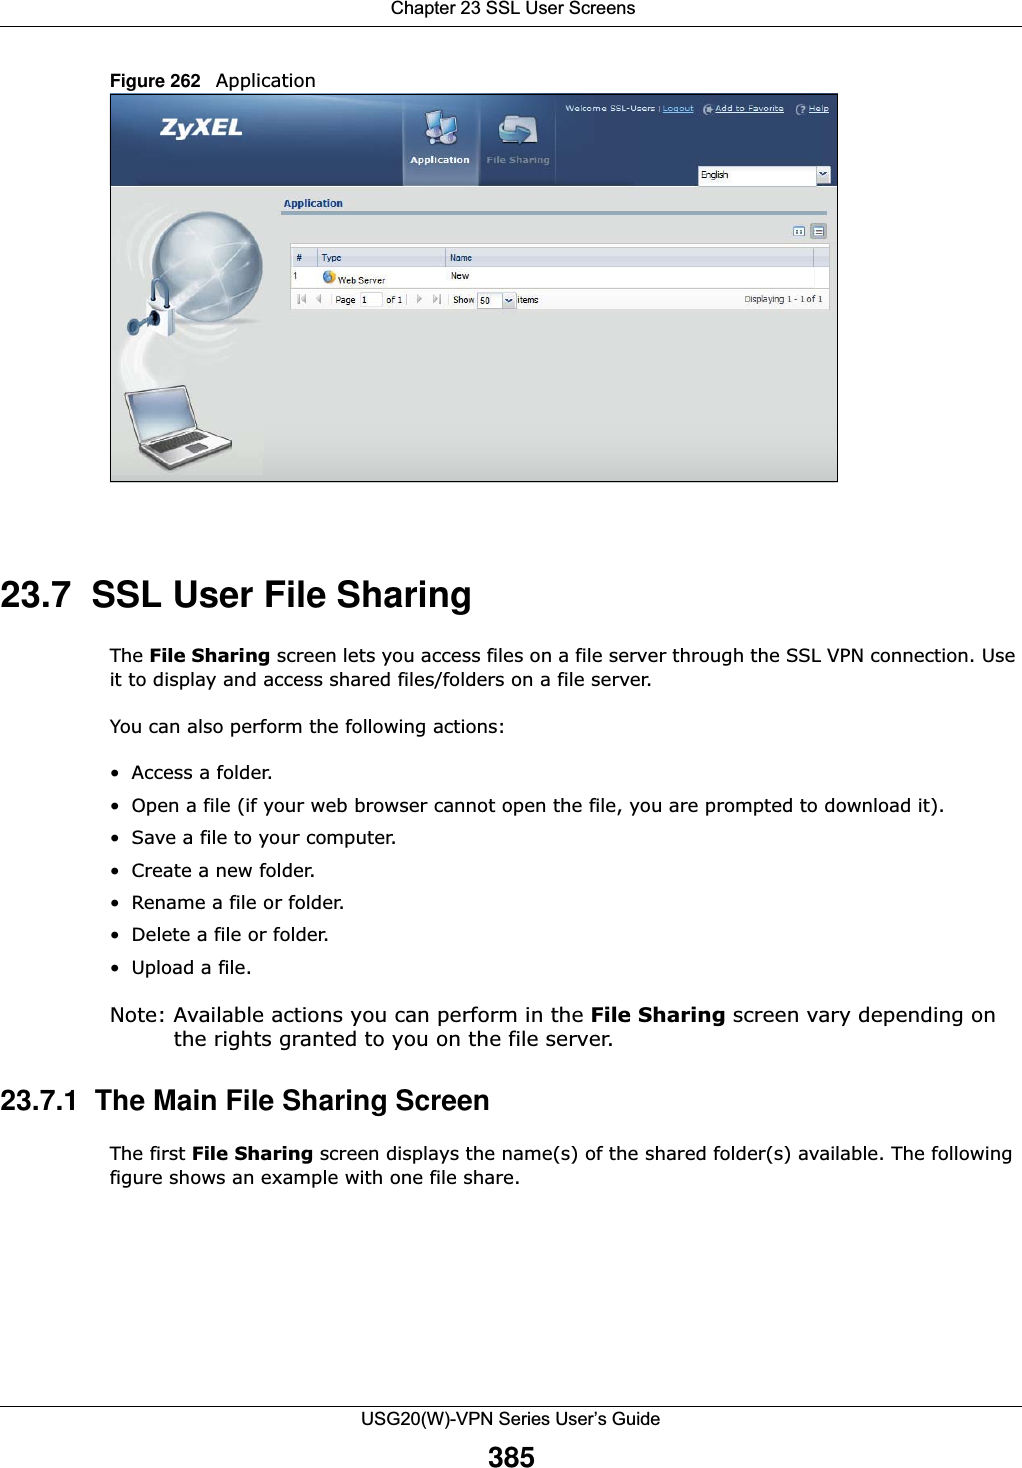  Chapter 23 SSL User ScreensUSG20(W)-VPN Series User’s Guide385Figure 262   Application 23.7  SSL User File SharingThe File Sharing screen lets you access files on a file server through the SSL VPN connection. Use it to display and access shared files/folders on a file server. You can also perform the following actions:• Access a folder. • Open a file (if your web browser cannot open the file, you are prompted to download it). • Save a file to your computer. • Create a new folder.• Rename a file or folder.• Delete a file or folder.• Upload a file.Note: Available actions you can perform in the File Sharing screen vary depending on the rights granted to you on the file server. 23.7.1  The Main File Sharing Screen The first File Sharing screen displays the name(s) of the shared folder(s) available. The following figure shows an example with one file share. 